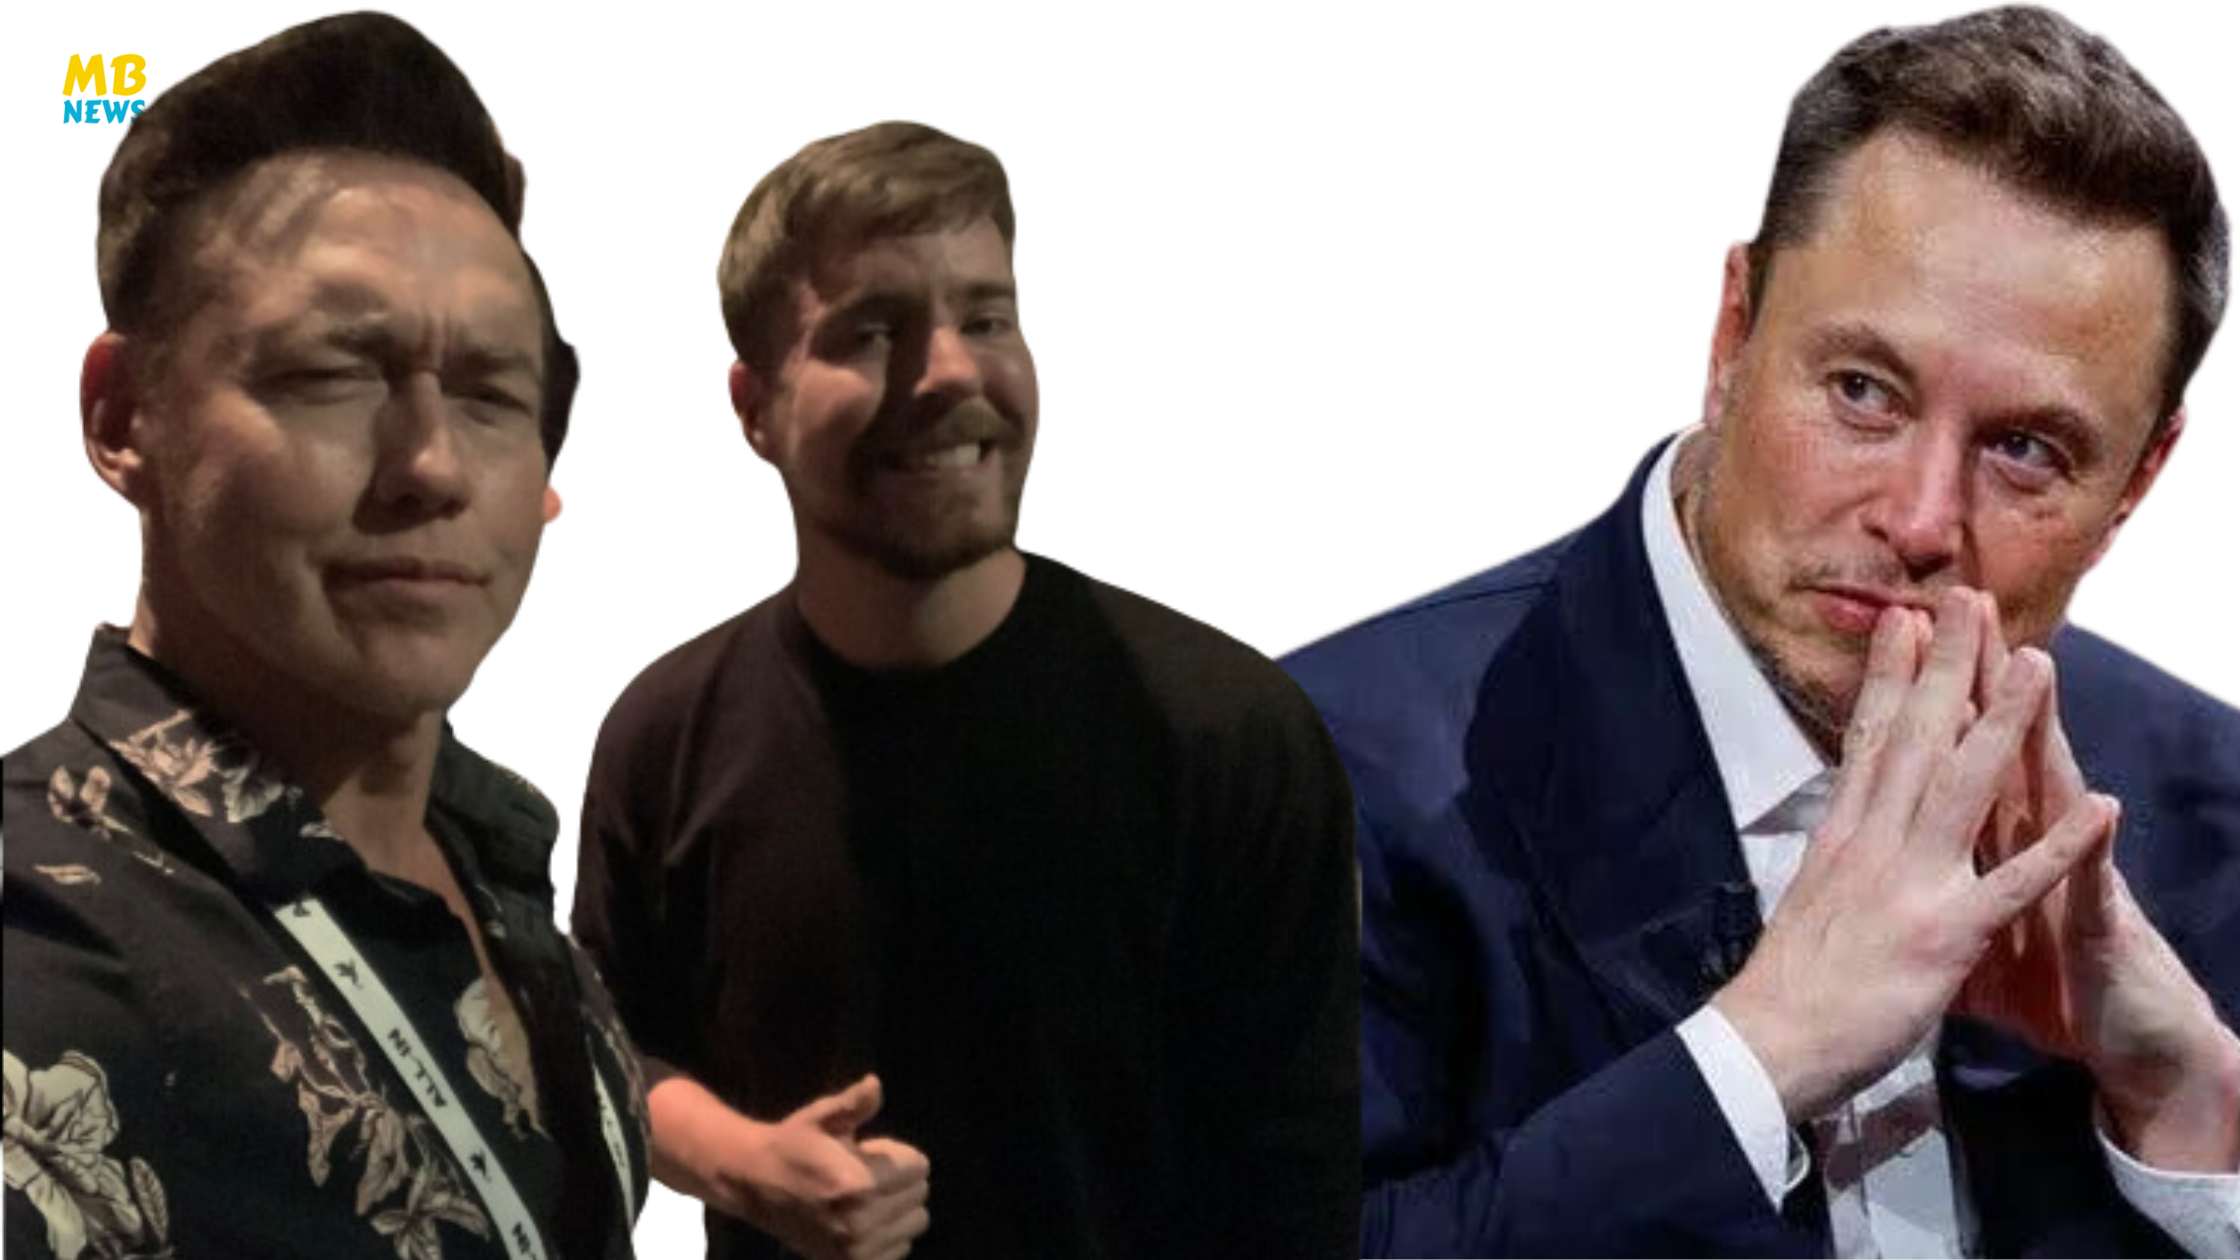 "I thought this guy was Elon Musk" MrBeast Mistakes Random Stranger for Elon Musk in Viral Photo Mishap!